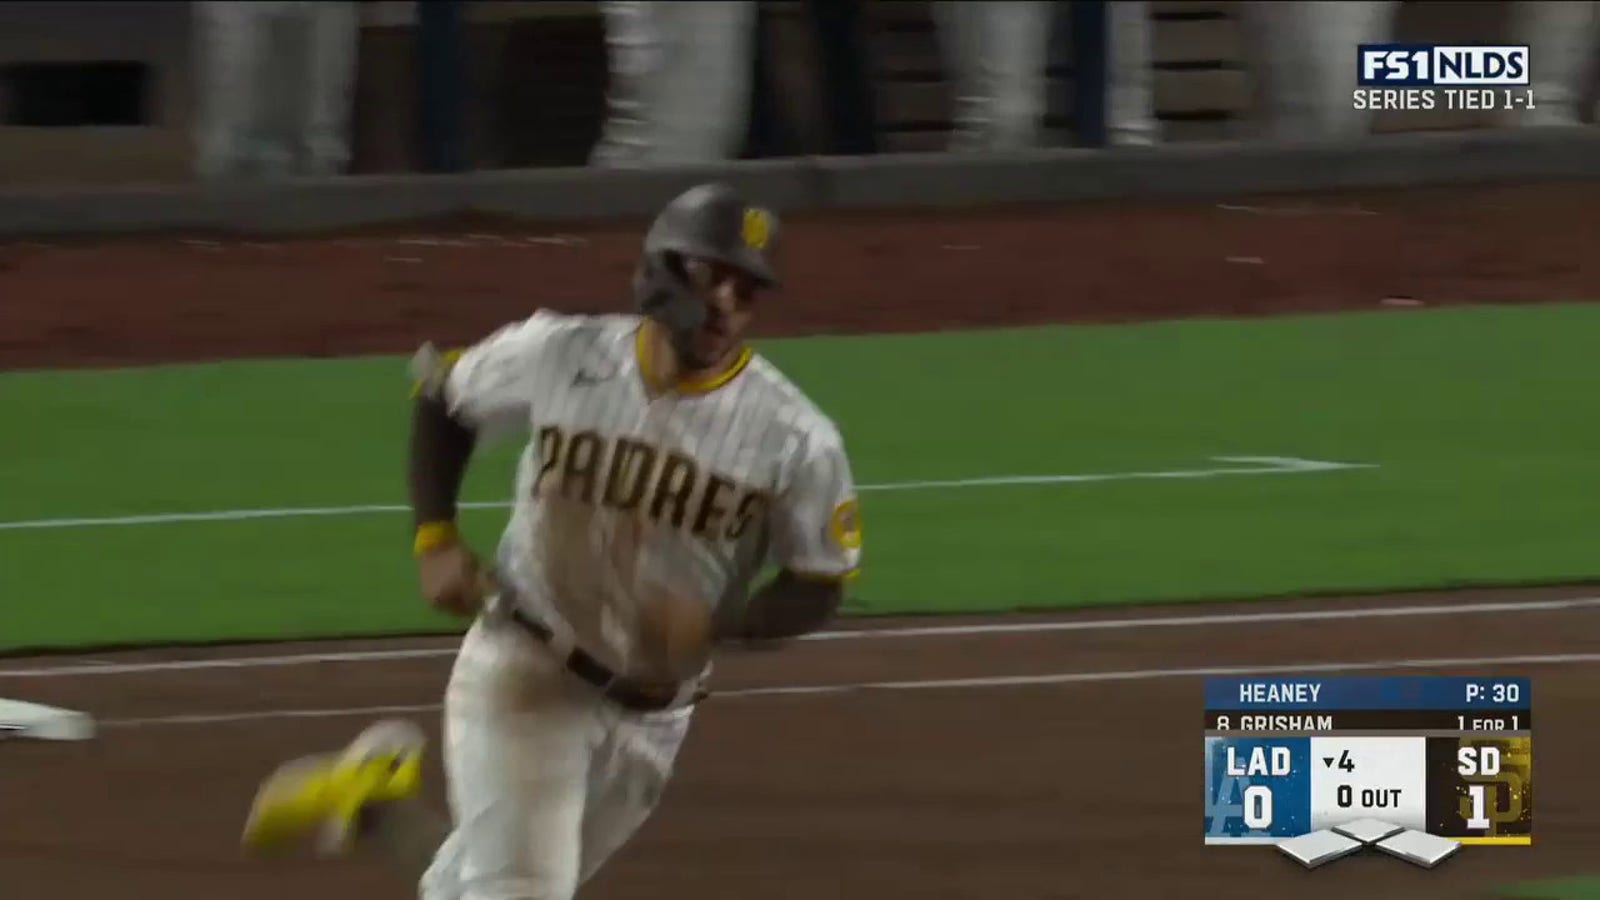 Trent Grisham hits a solo home run to give the Padres a 2-0 lead